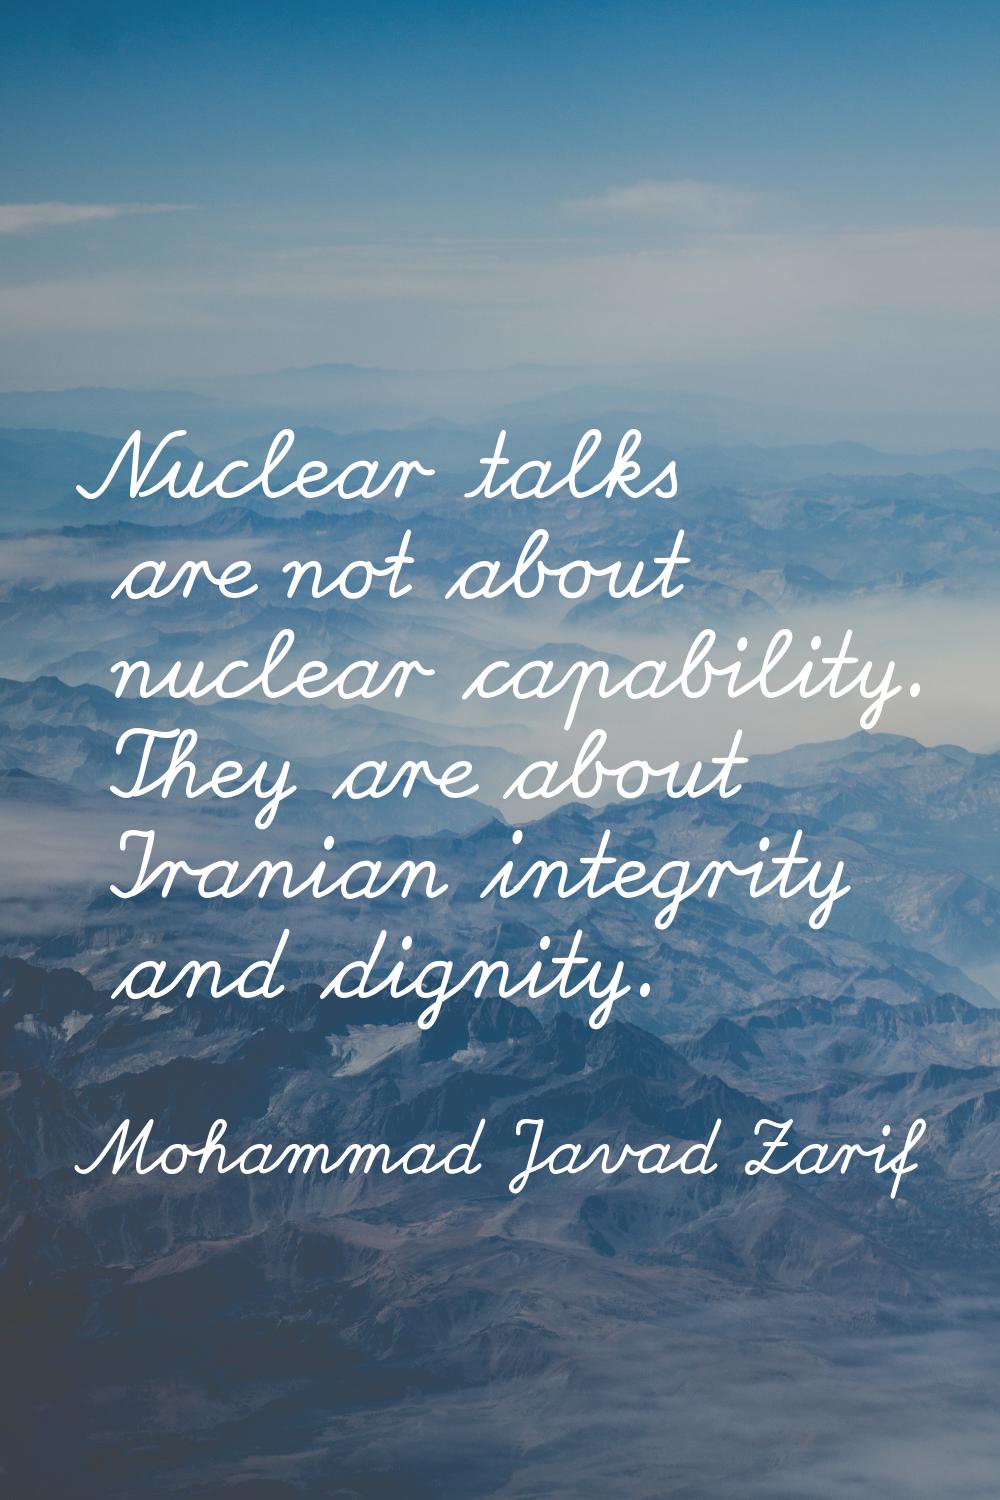 Nuclear talks are not about nuclear capability. They are about Iranian integrity and dignity.